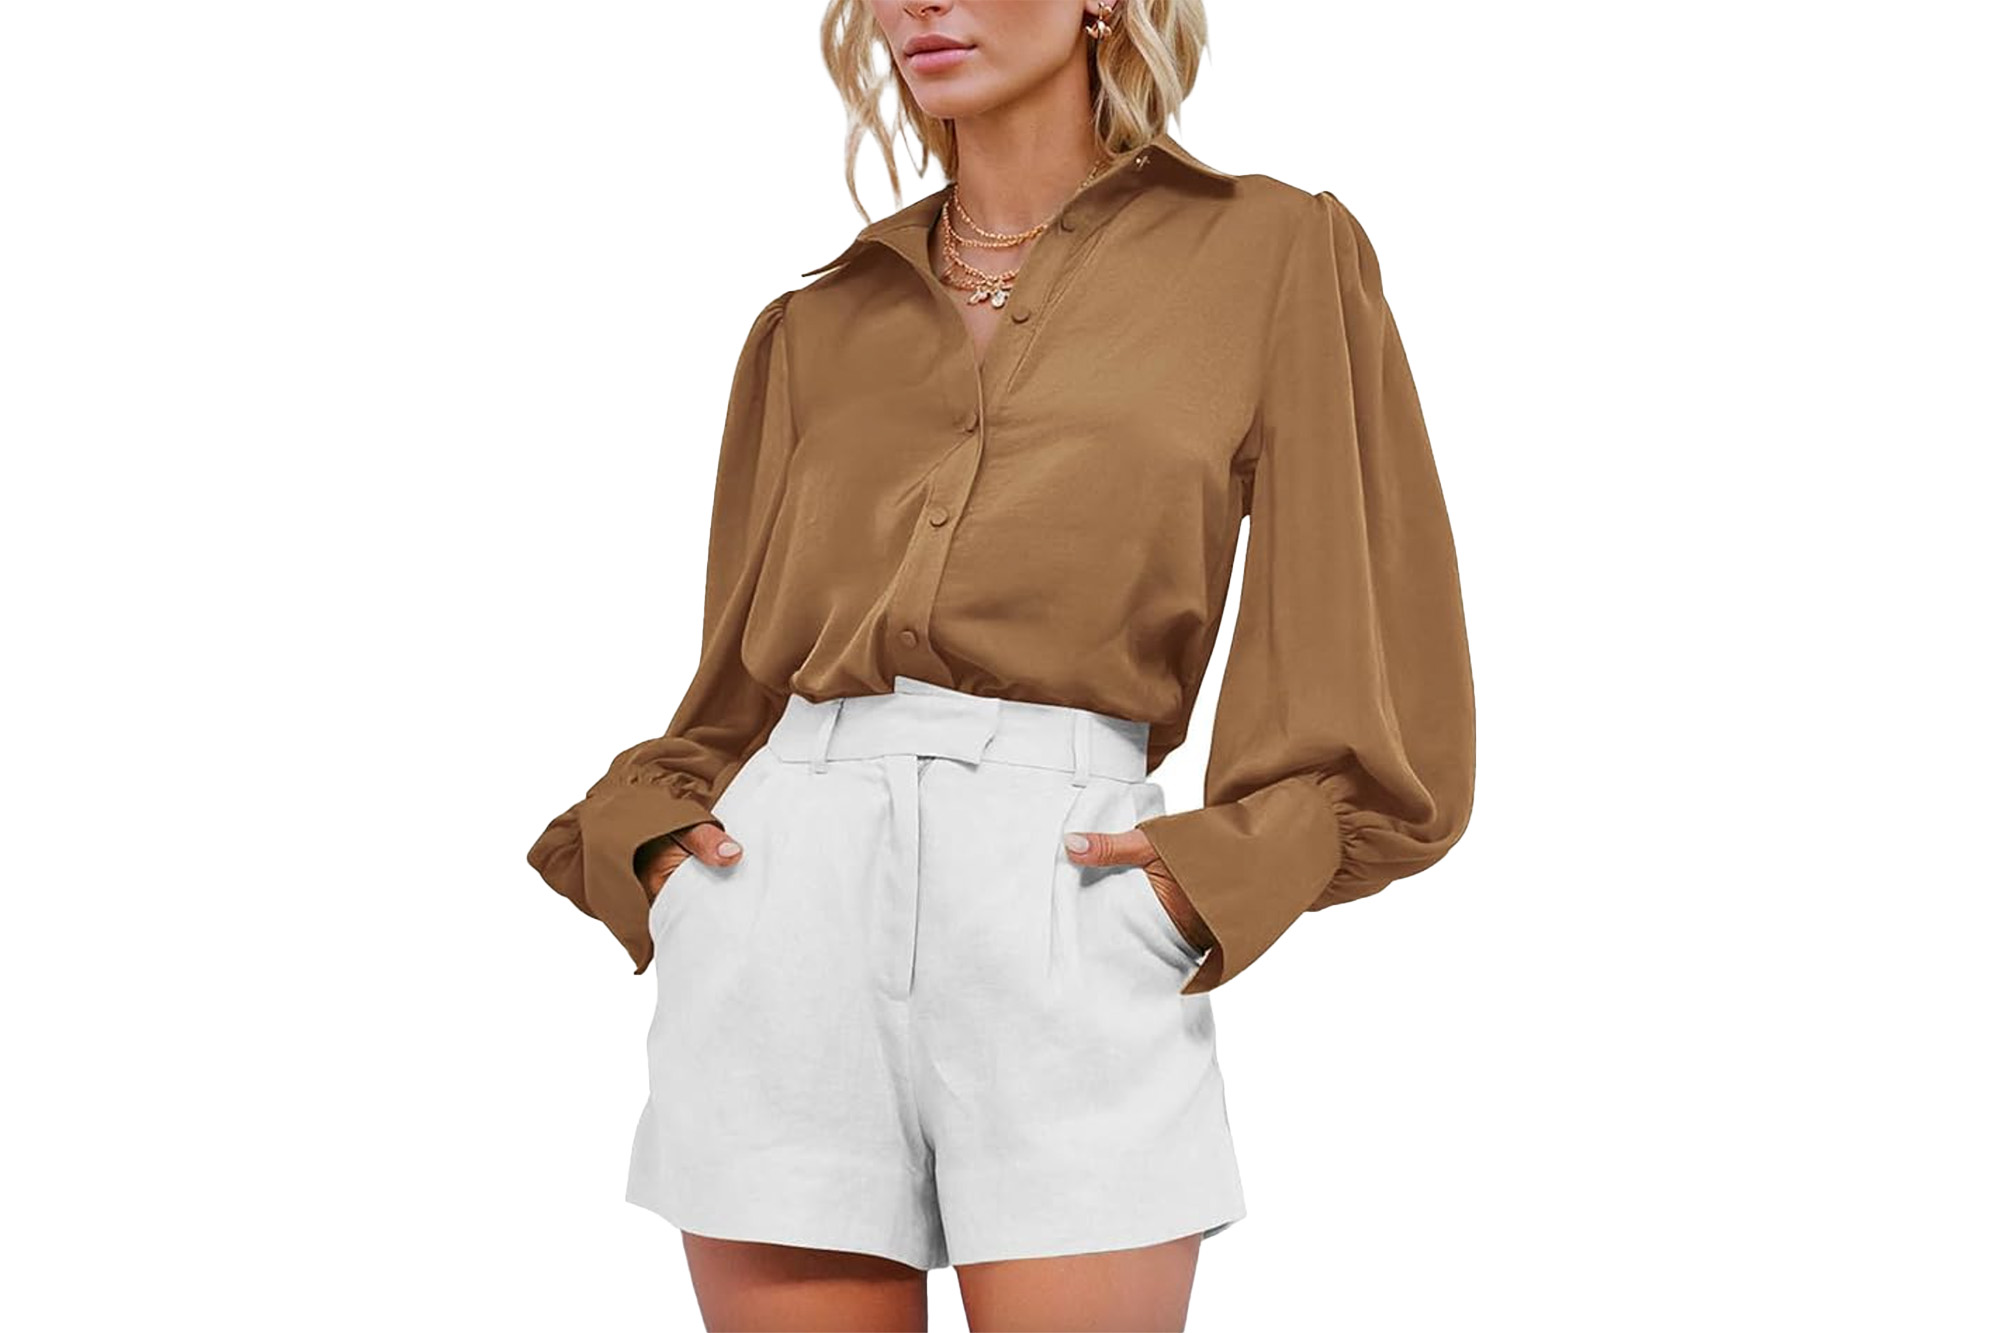 This 'Luxurious' Satin Button Down Is Perfect for Spring